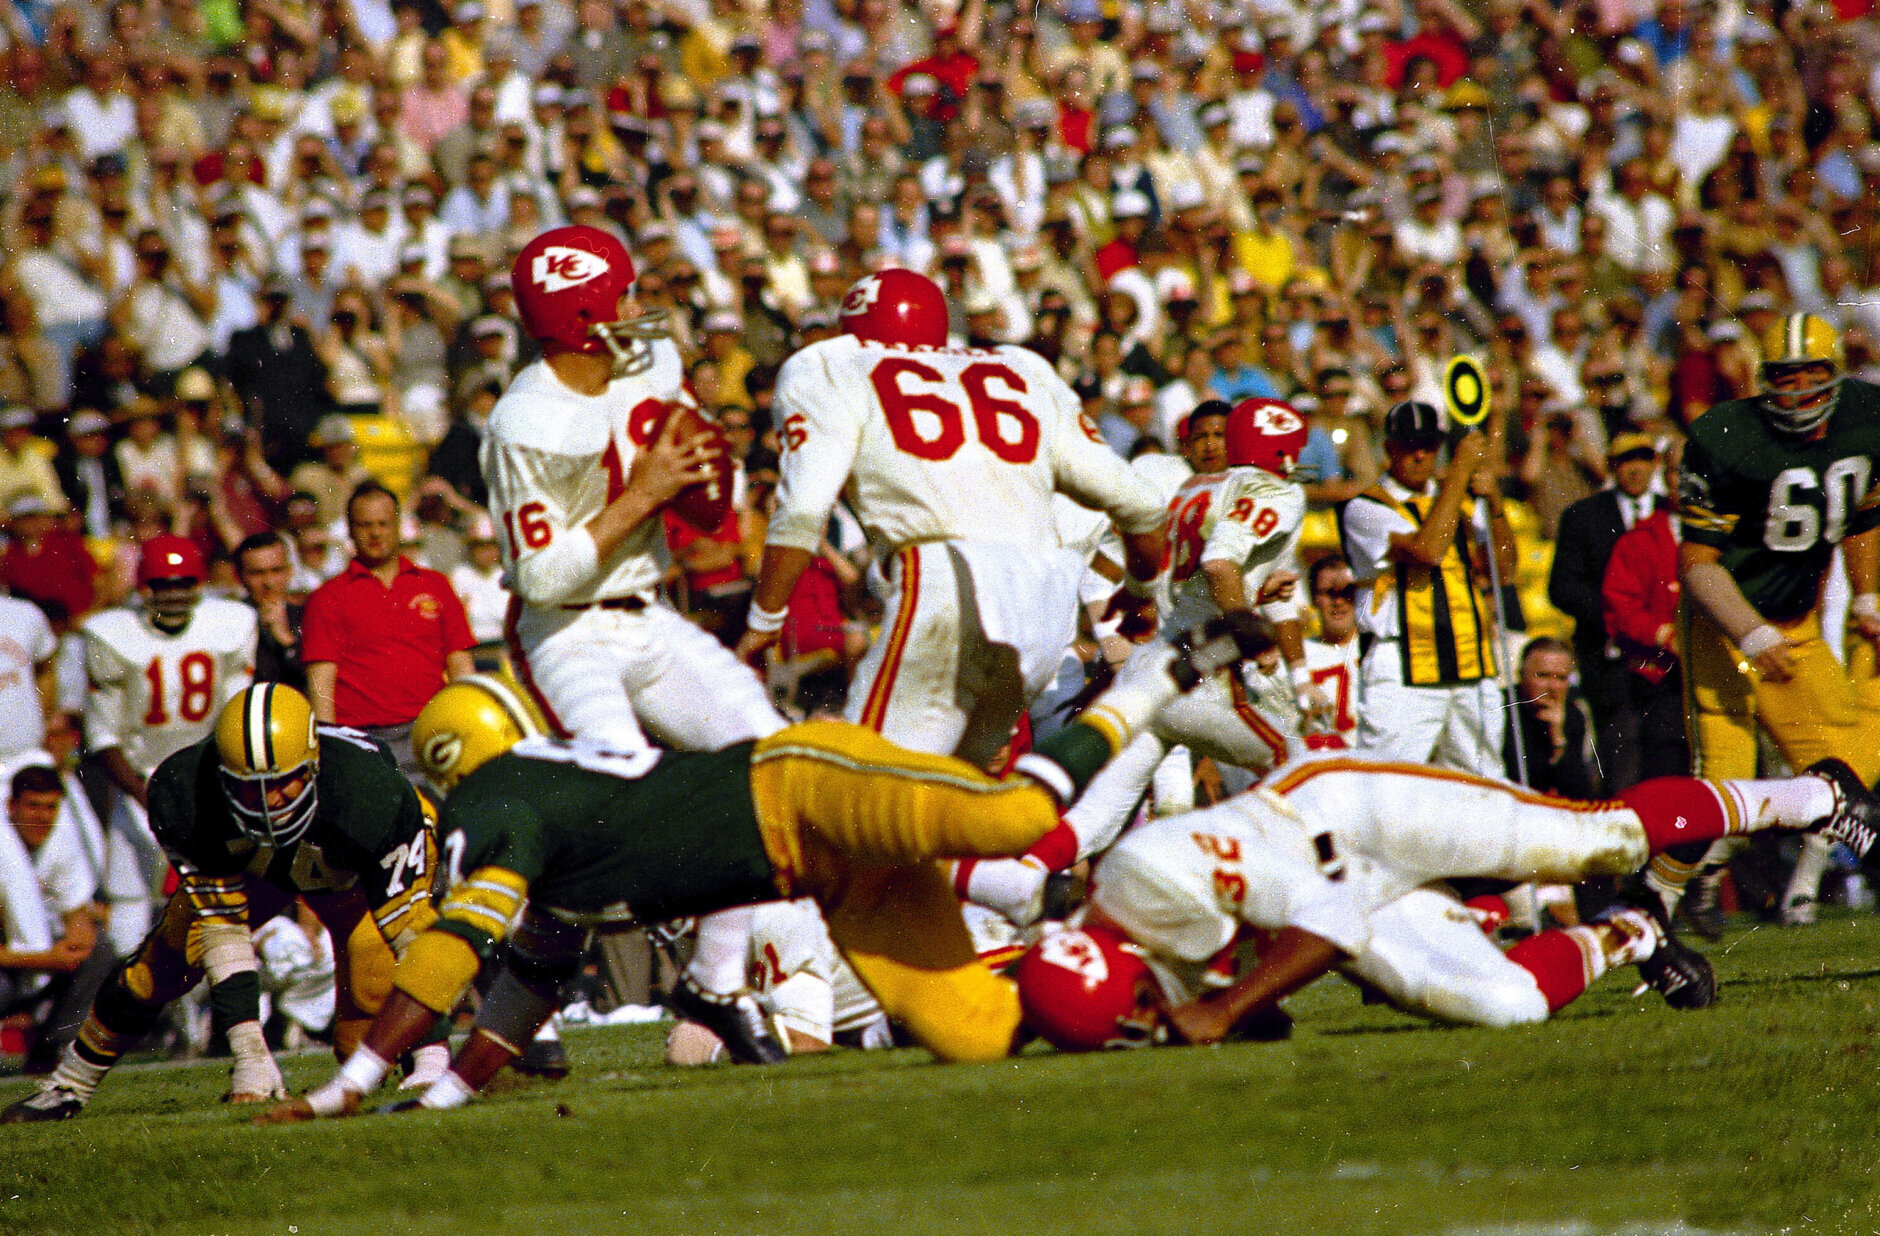 Kansas City Chiefs' quarterback Len Dawson (16) gets ready to release the ball during the first Super Bowl, Jan. 15, 1967, against the Green Bay Packers at the Los Angeles Coliseum in Los Angeles, California.  The Green Bay Packers won the game.  (AP Photo)